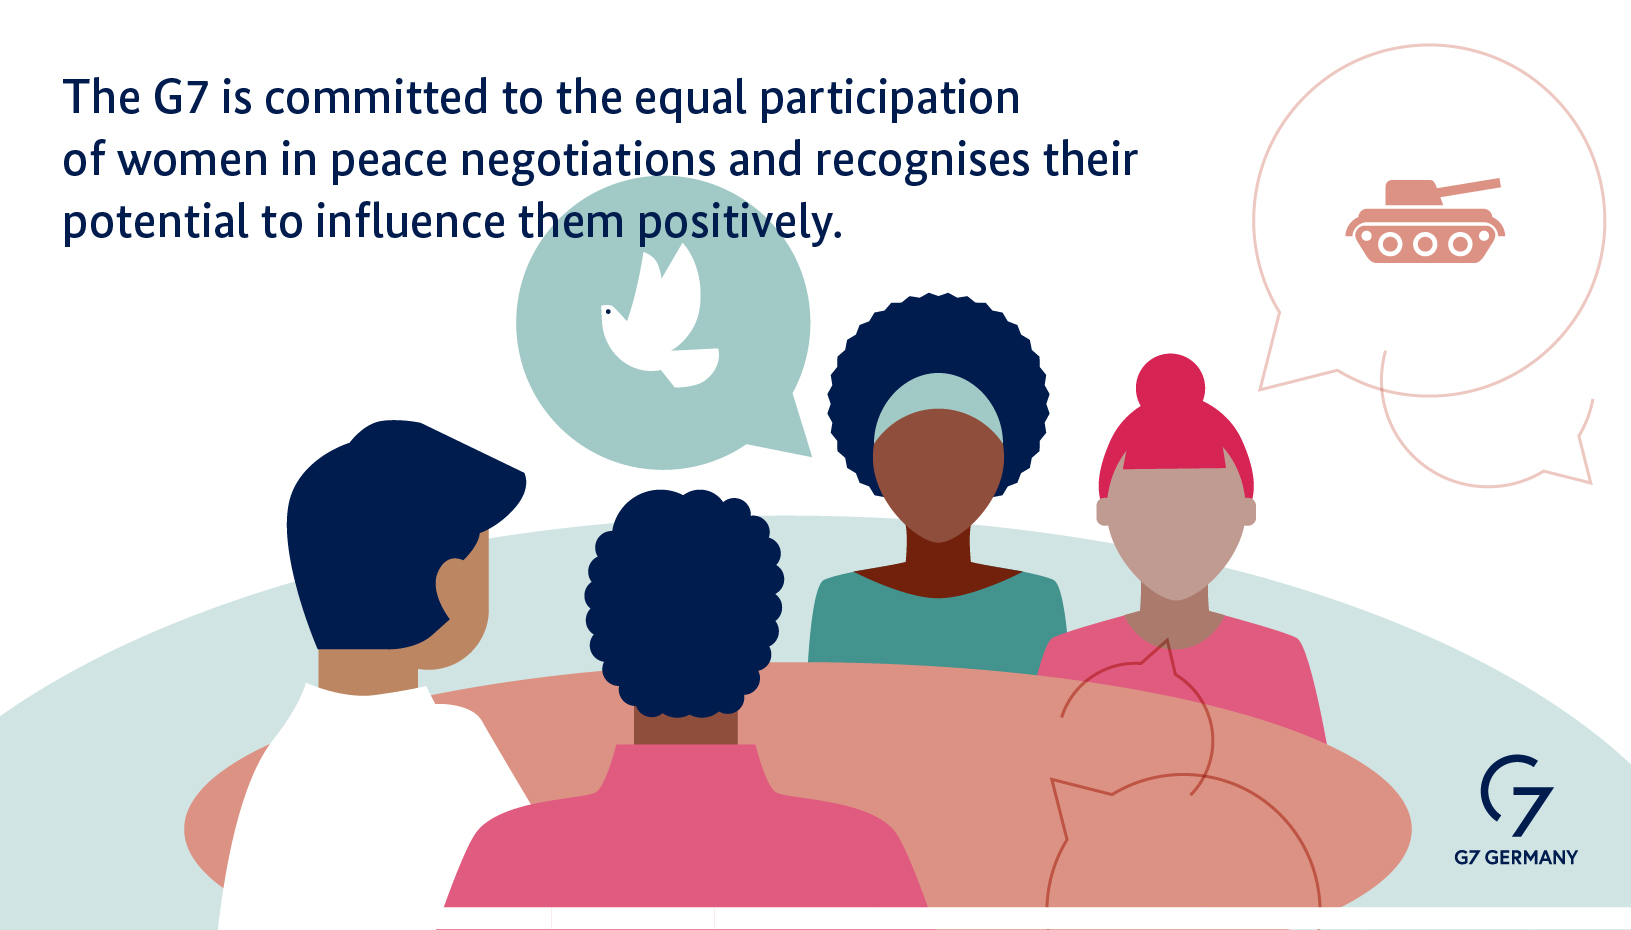 The G7 is committed to the equal participation of women in peace negotiations and recognises their potential to positively influence them.